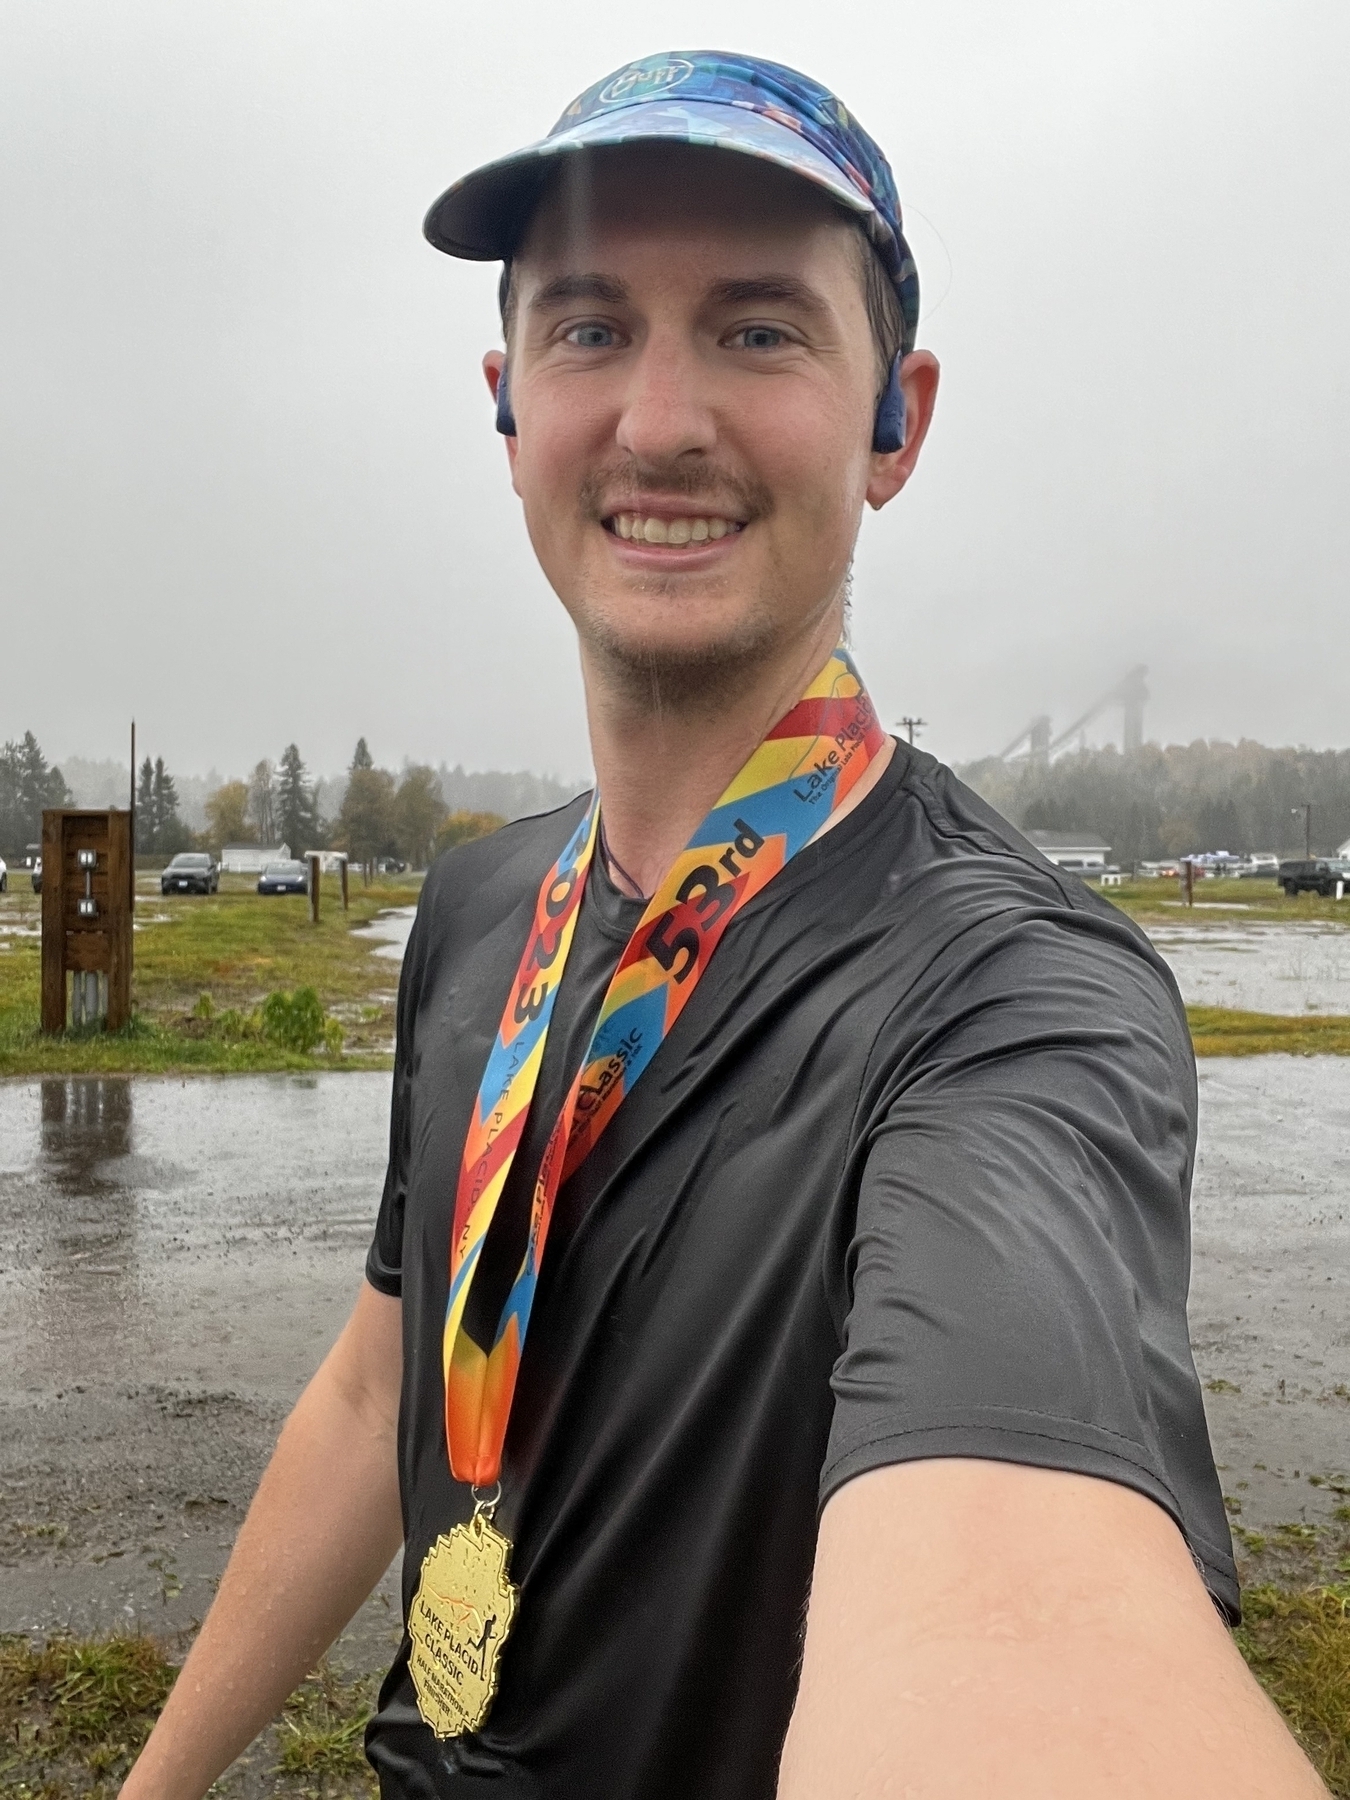 Me, soaked but wearing a smile and a medal.